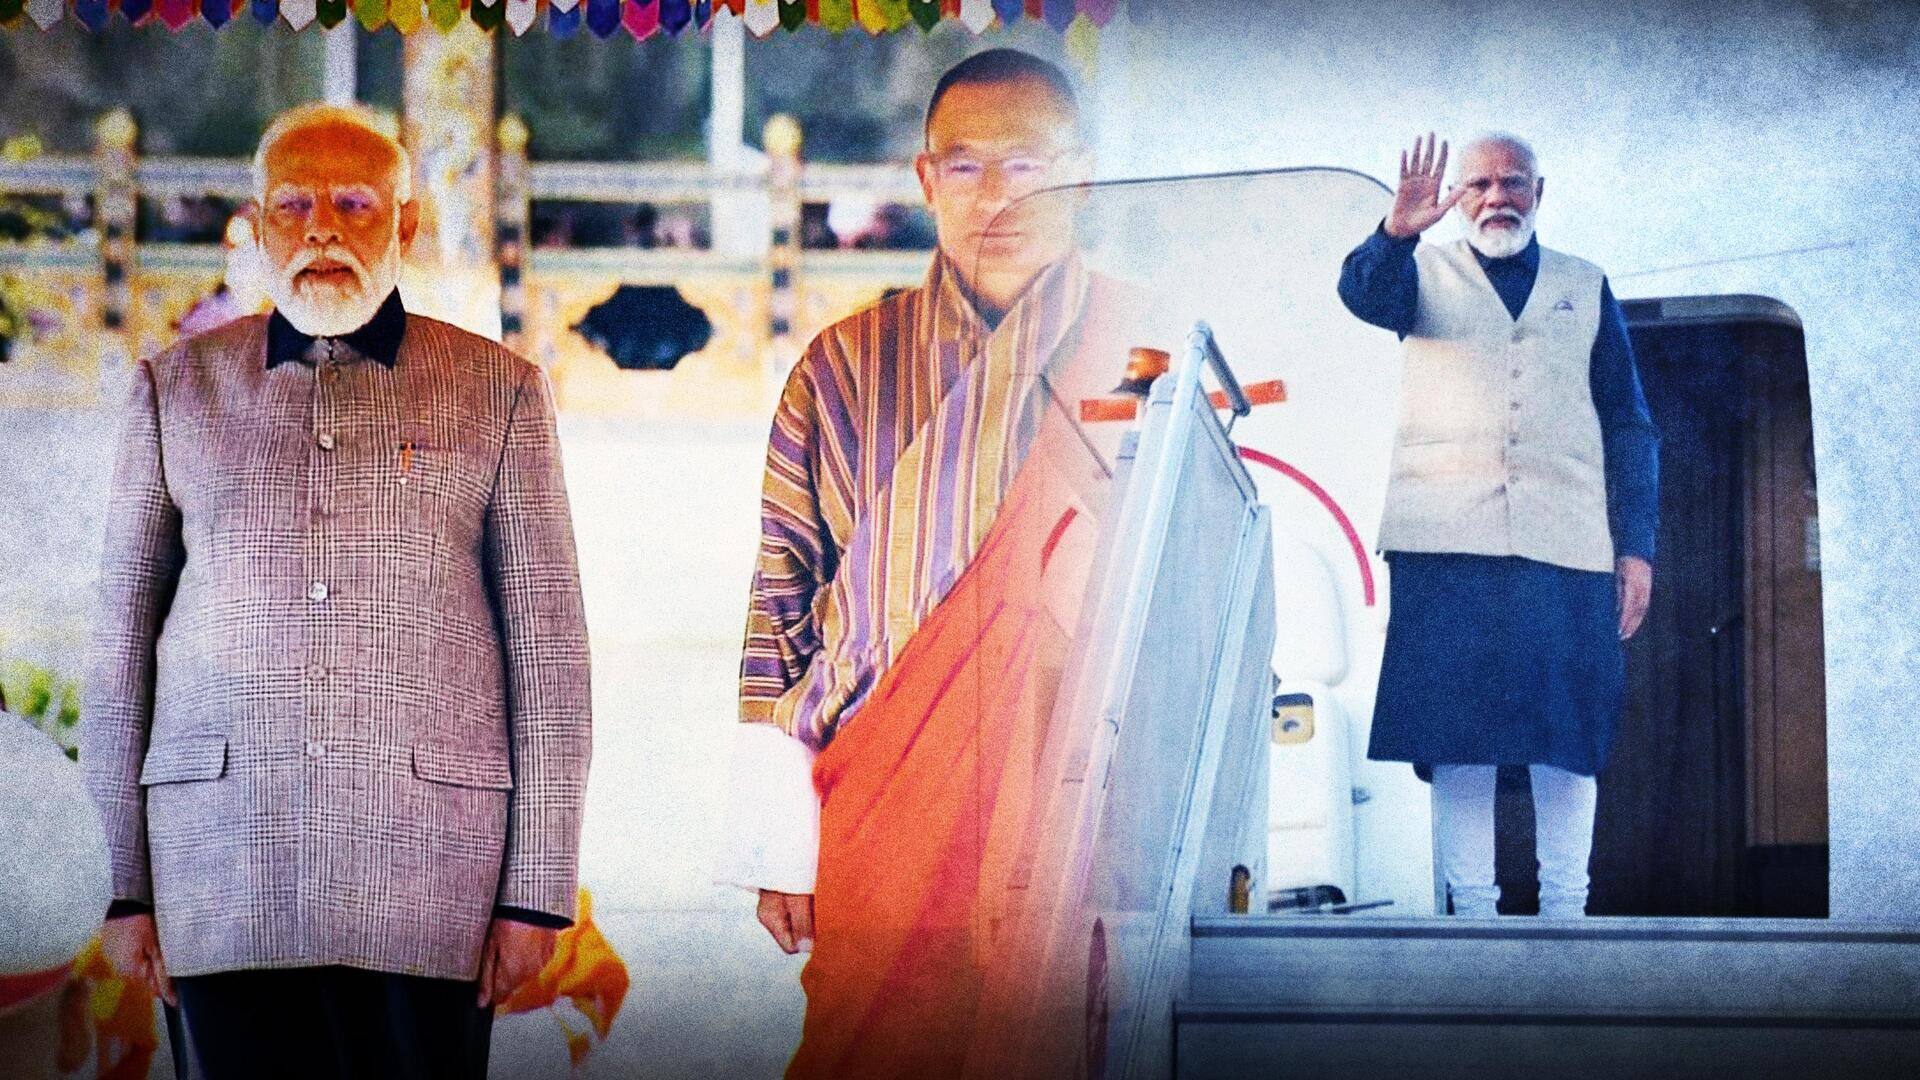 Explained: Significance of PM Modi's 2-day Bhutan visit